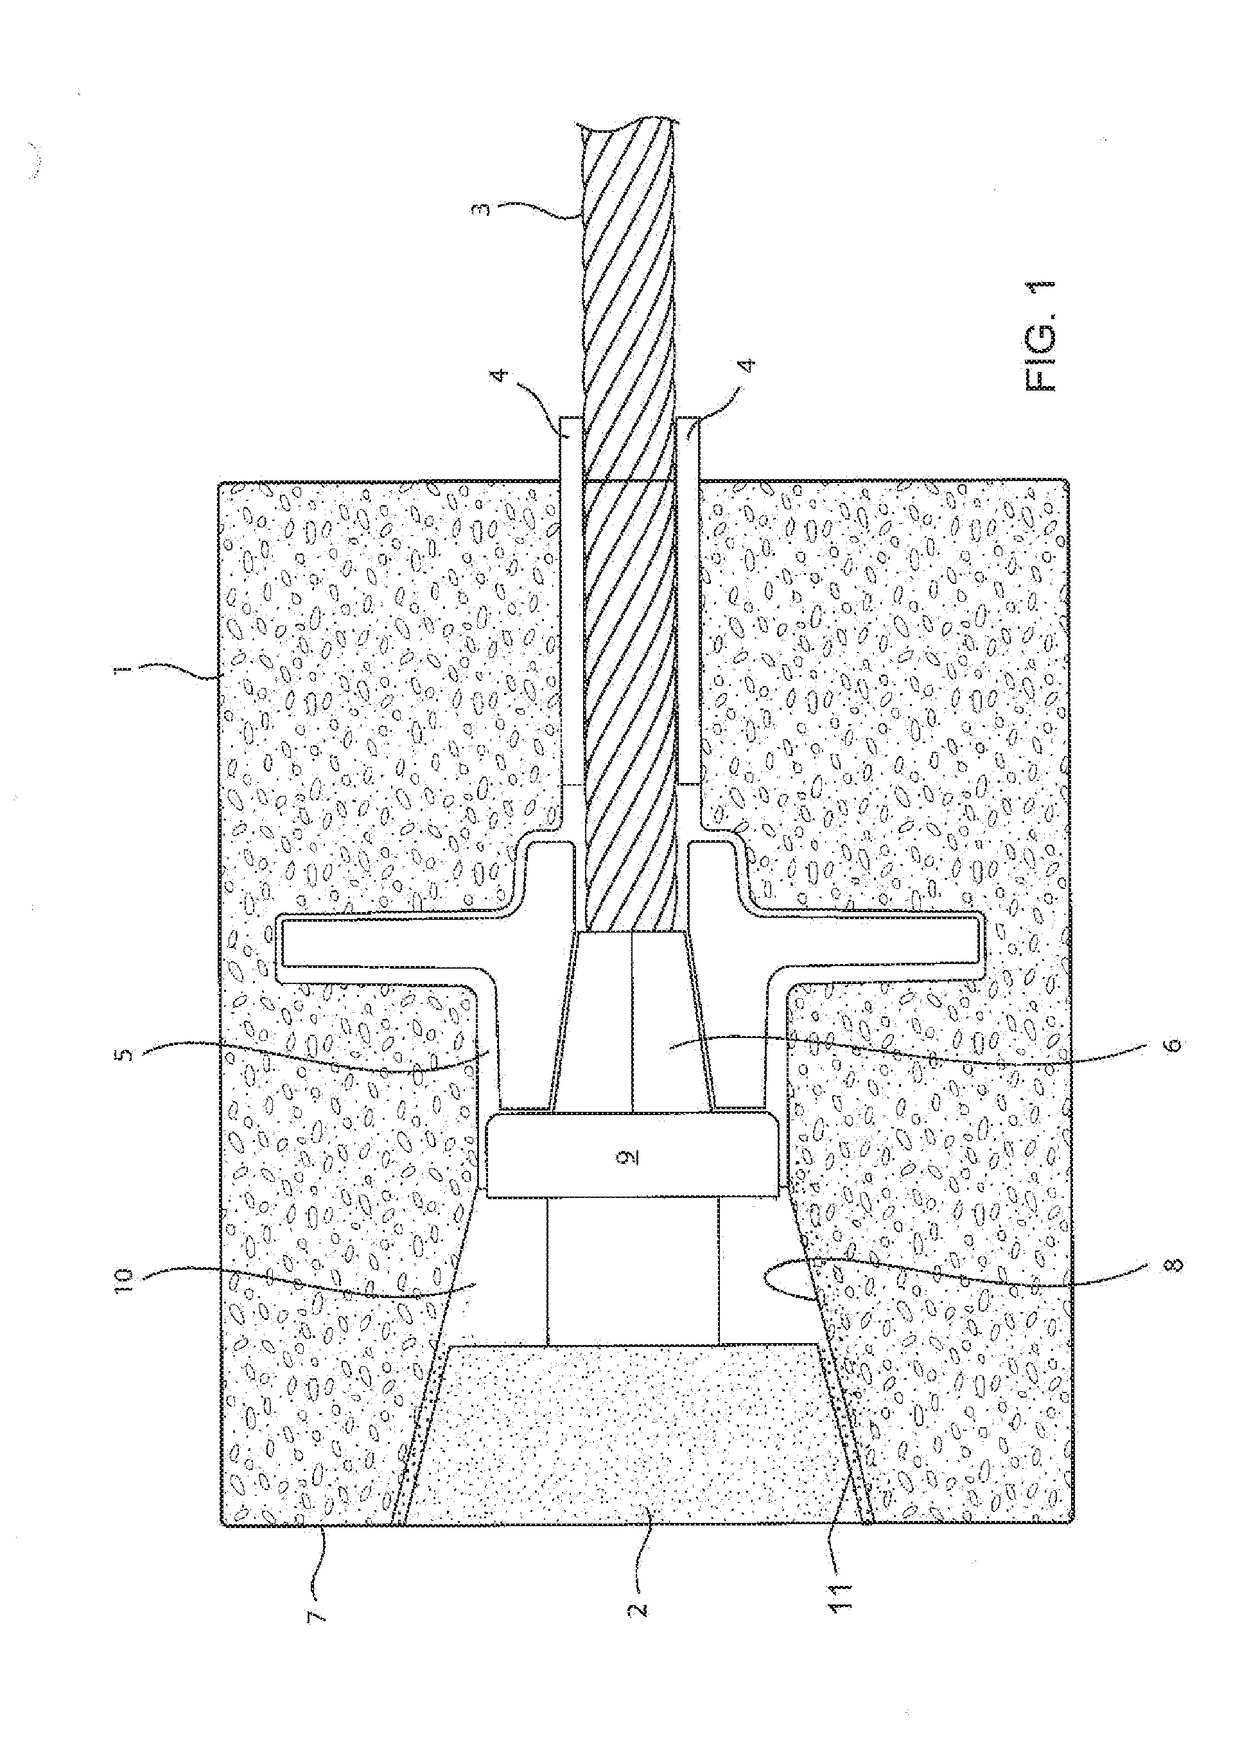 Post-tension cable protection system, method for installing the system and method for remediation of a defective post-tension reinforcement system